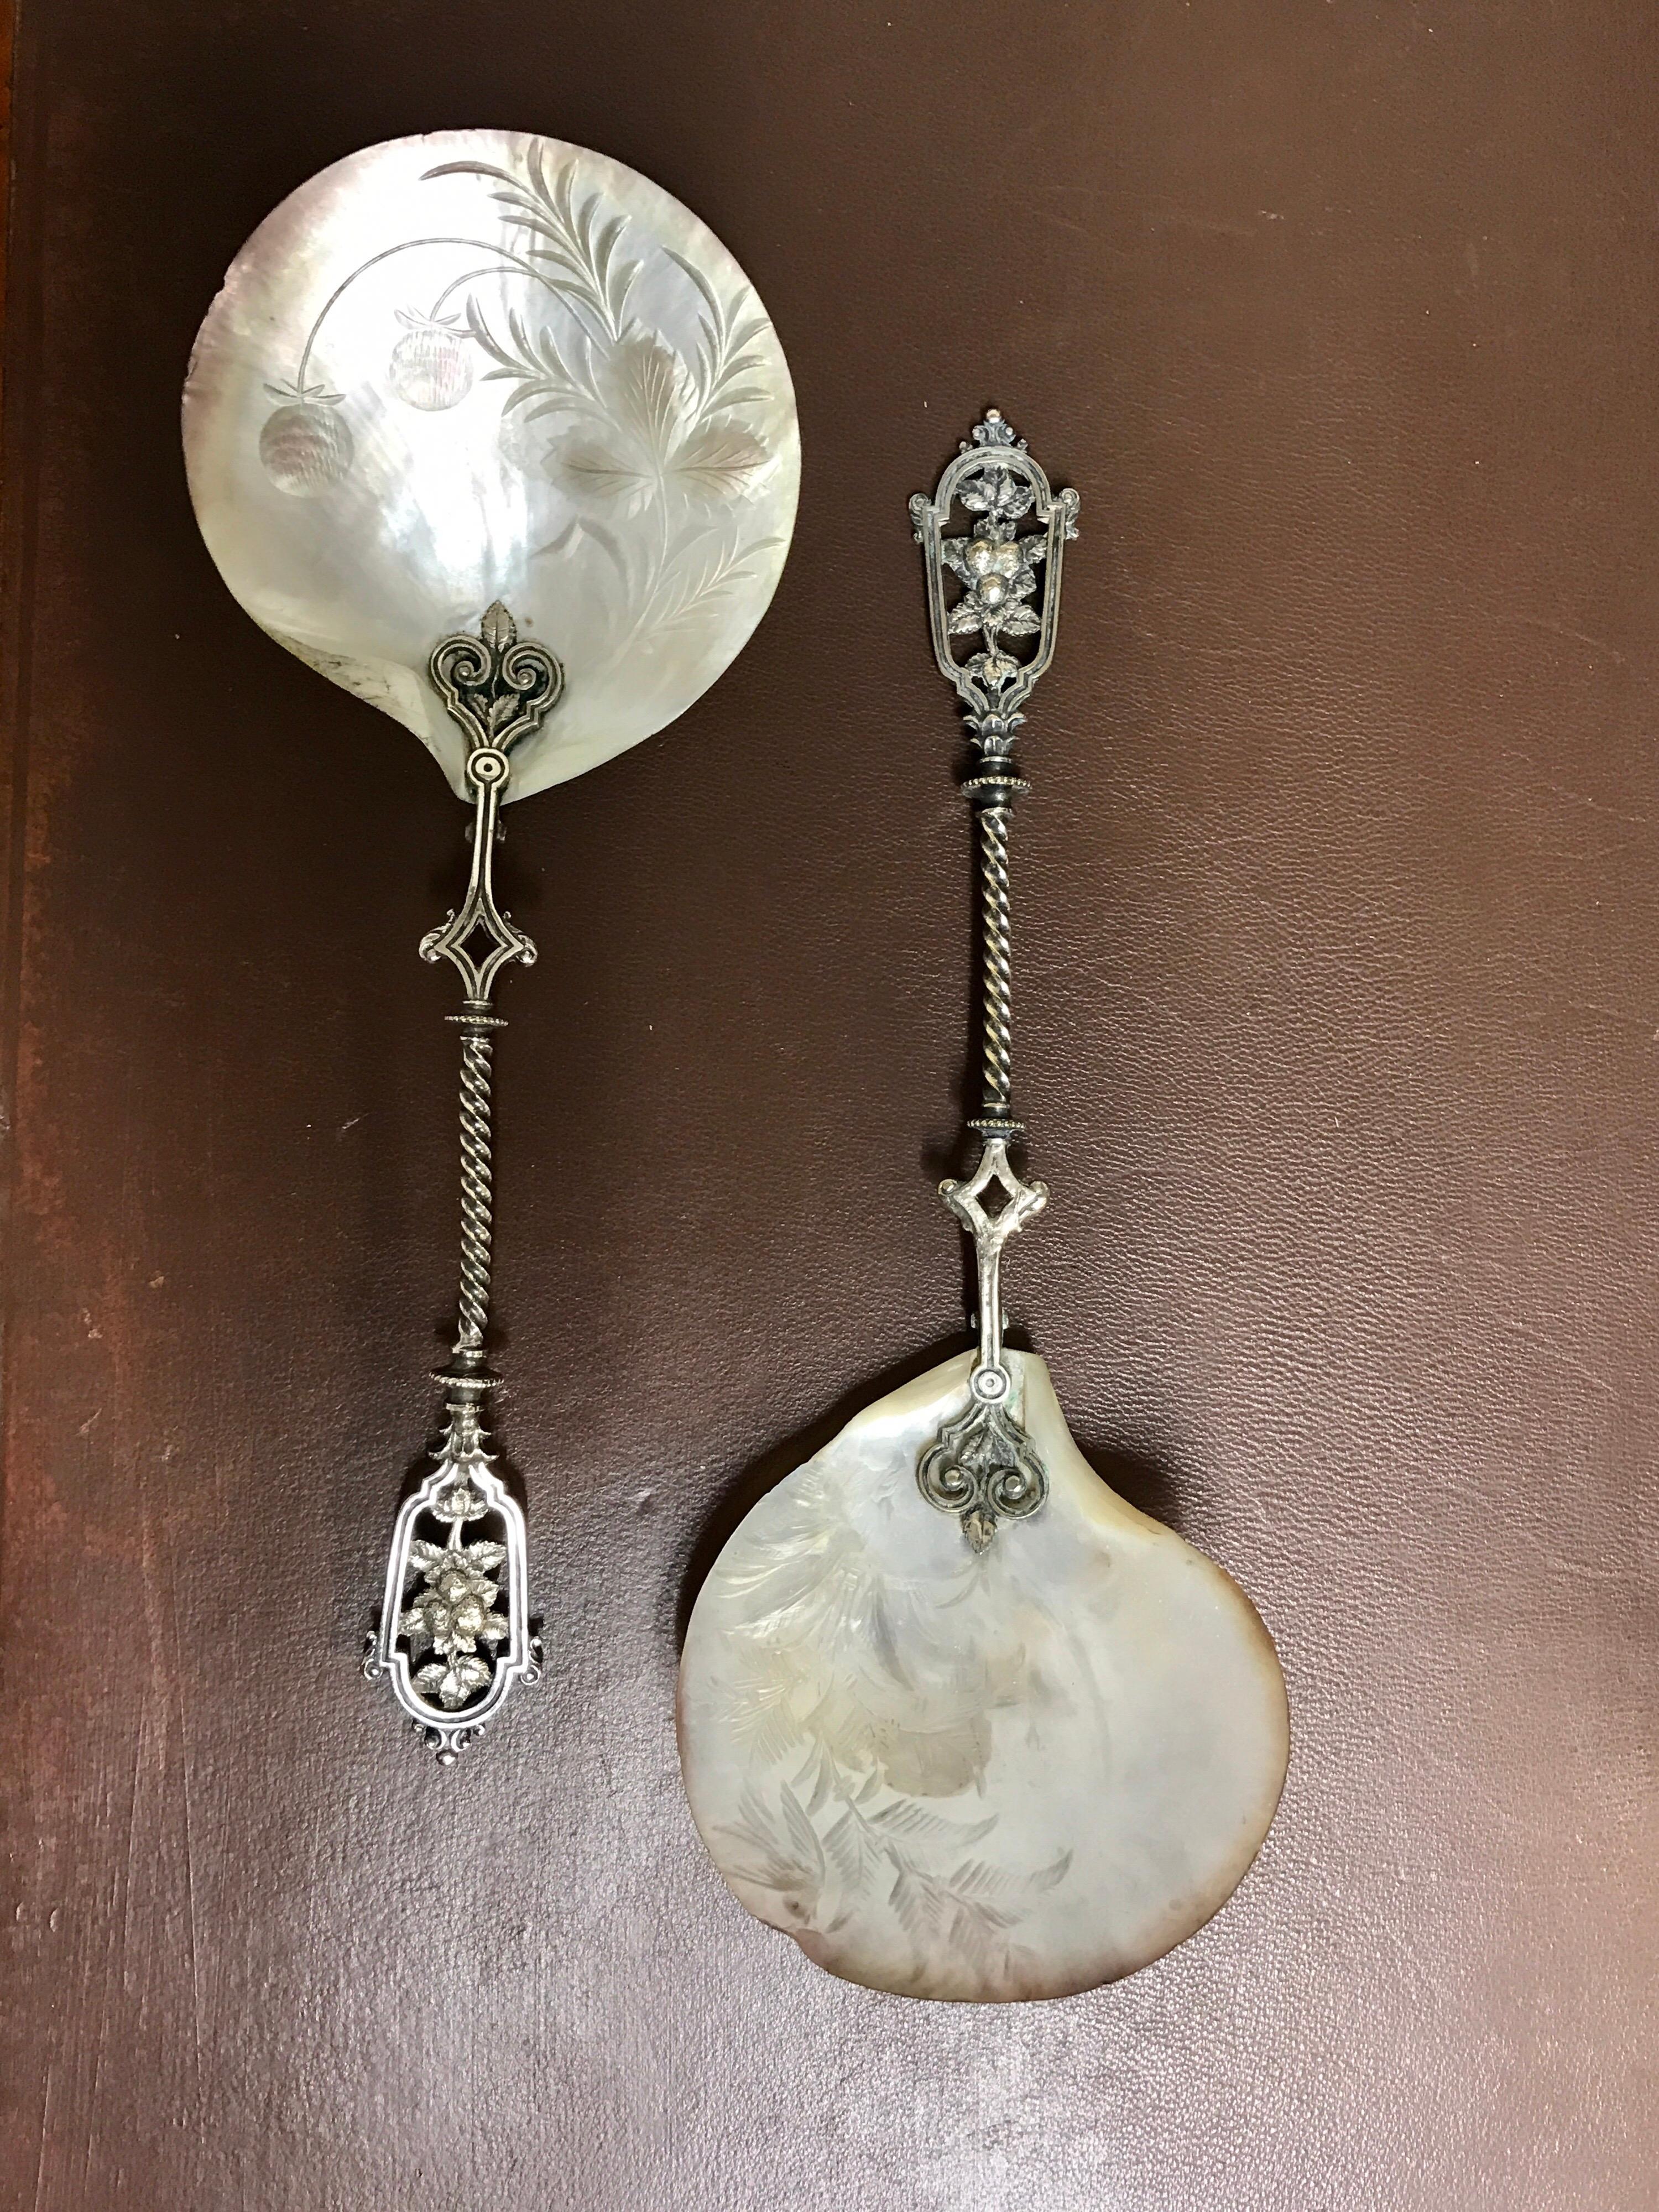 Pair of mother of pearl and silver strawberry spoons, each one with cast silver twisted handles with strawberries, and a 4